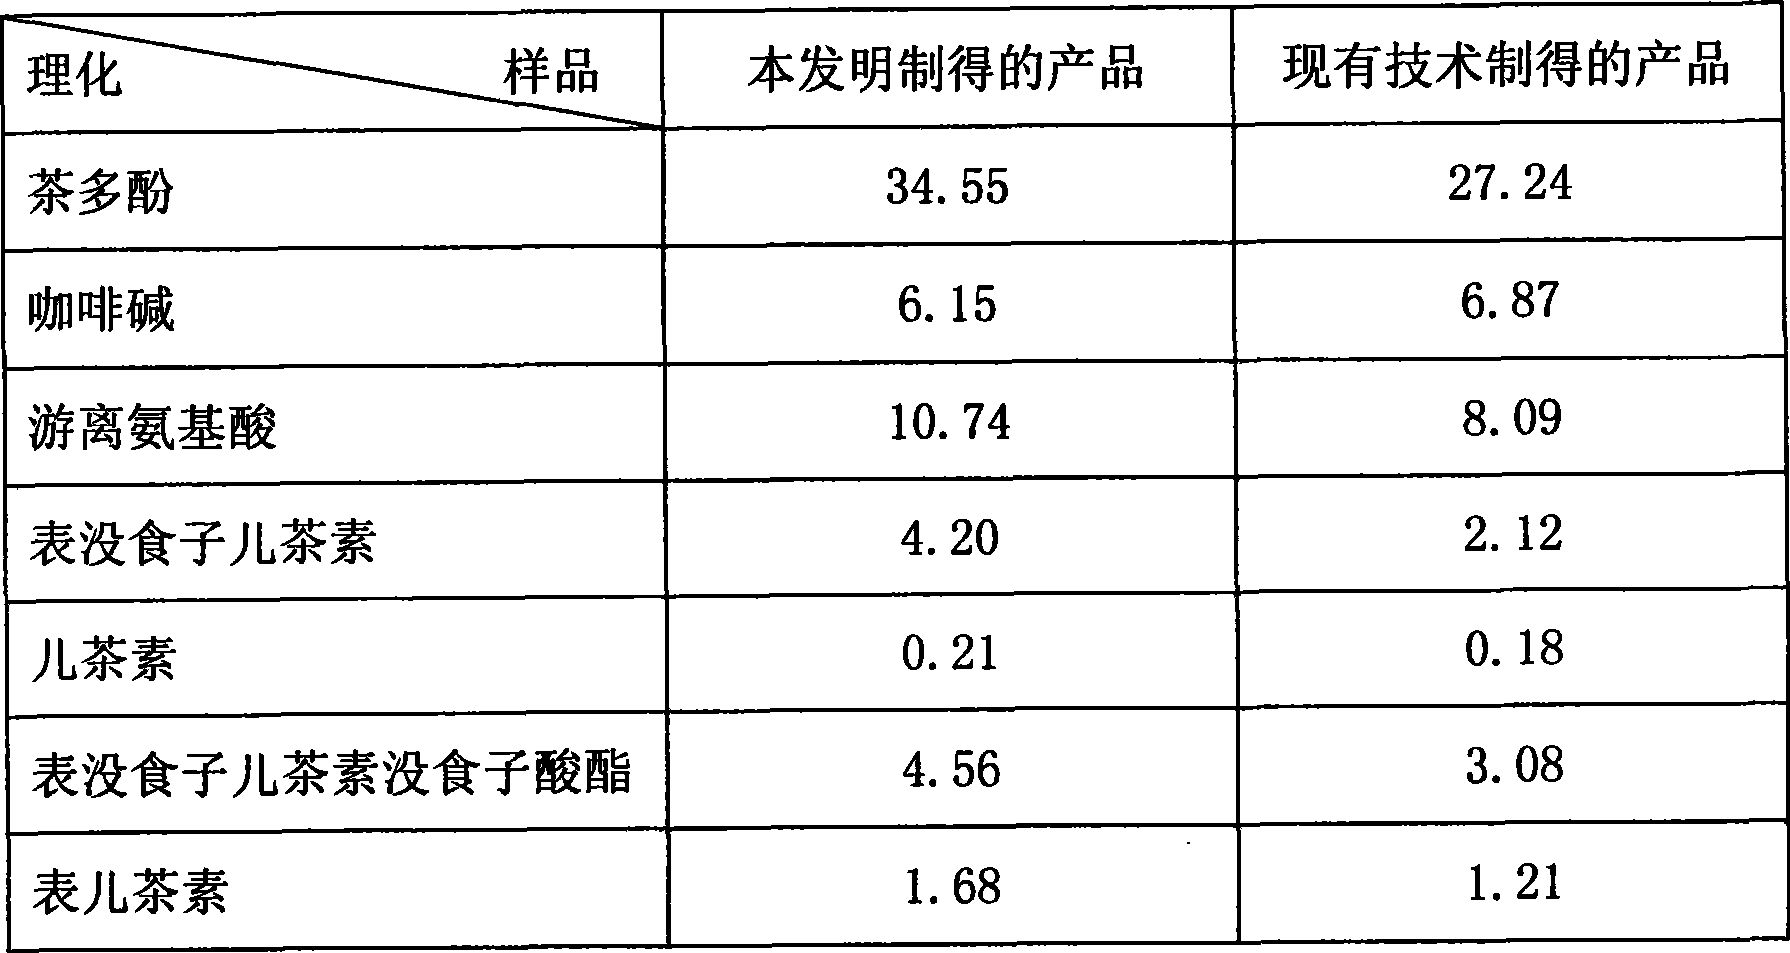 Processing method for cold instant white tea powder